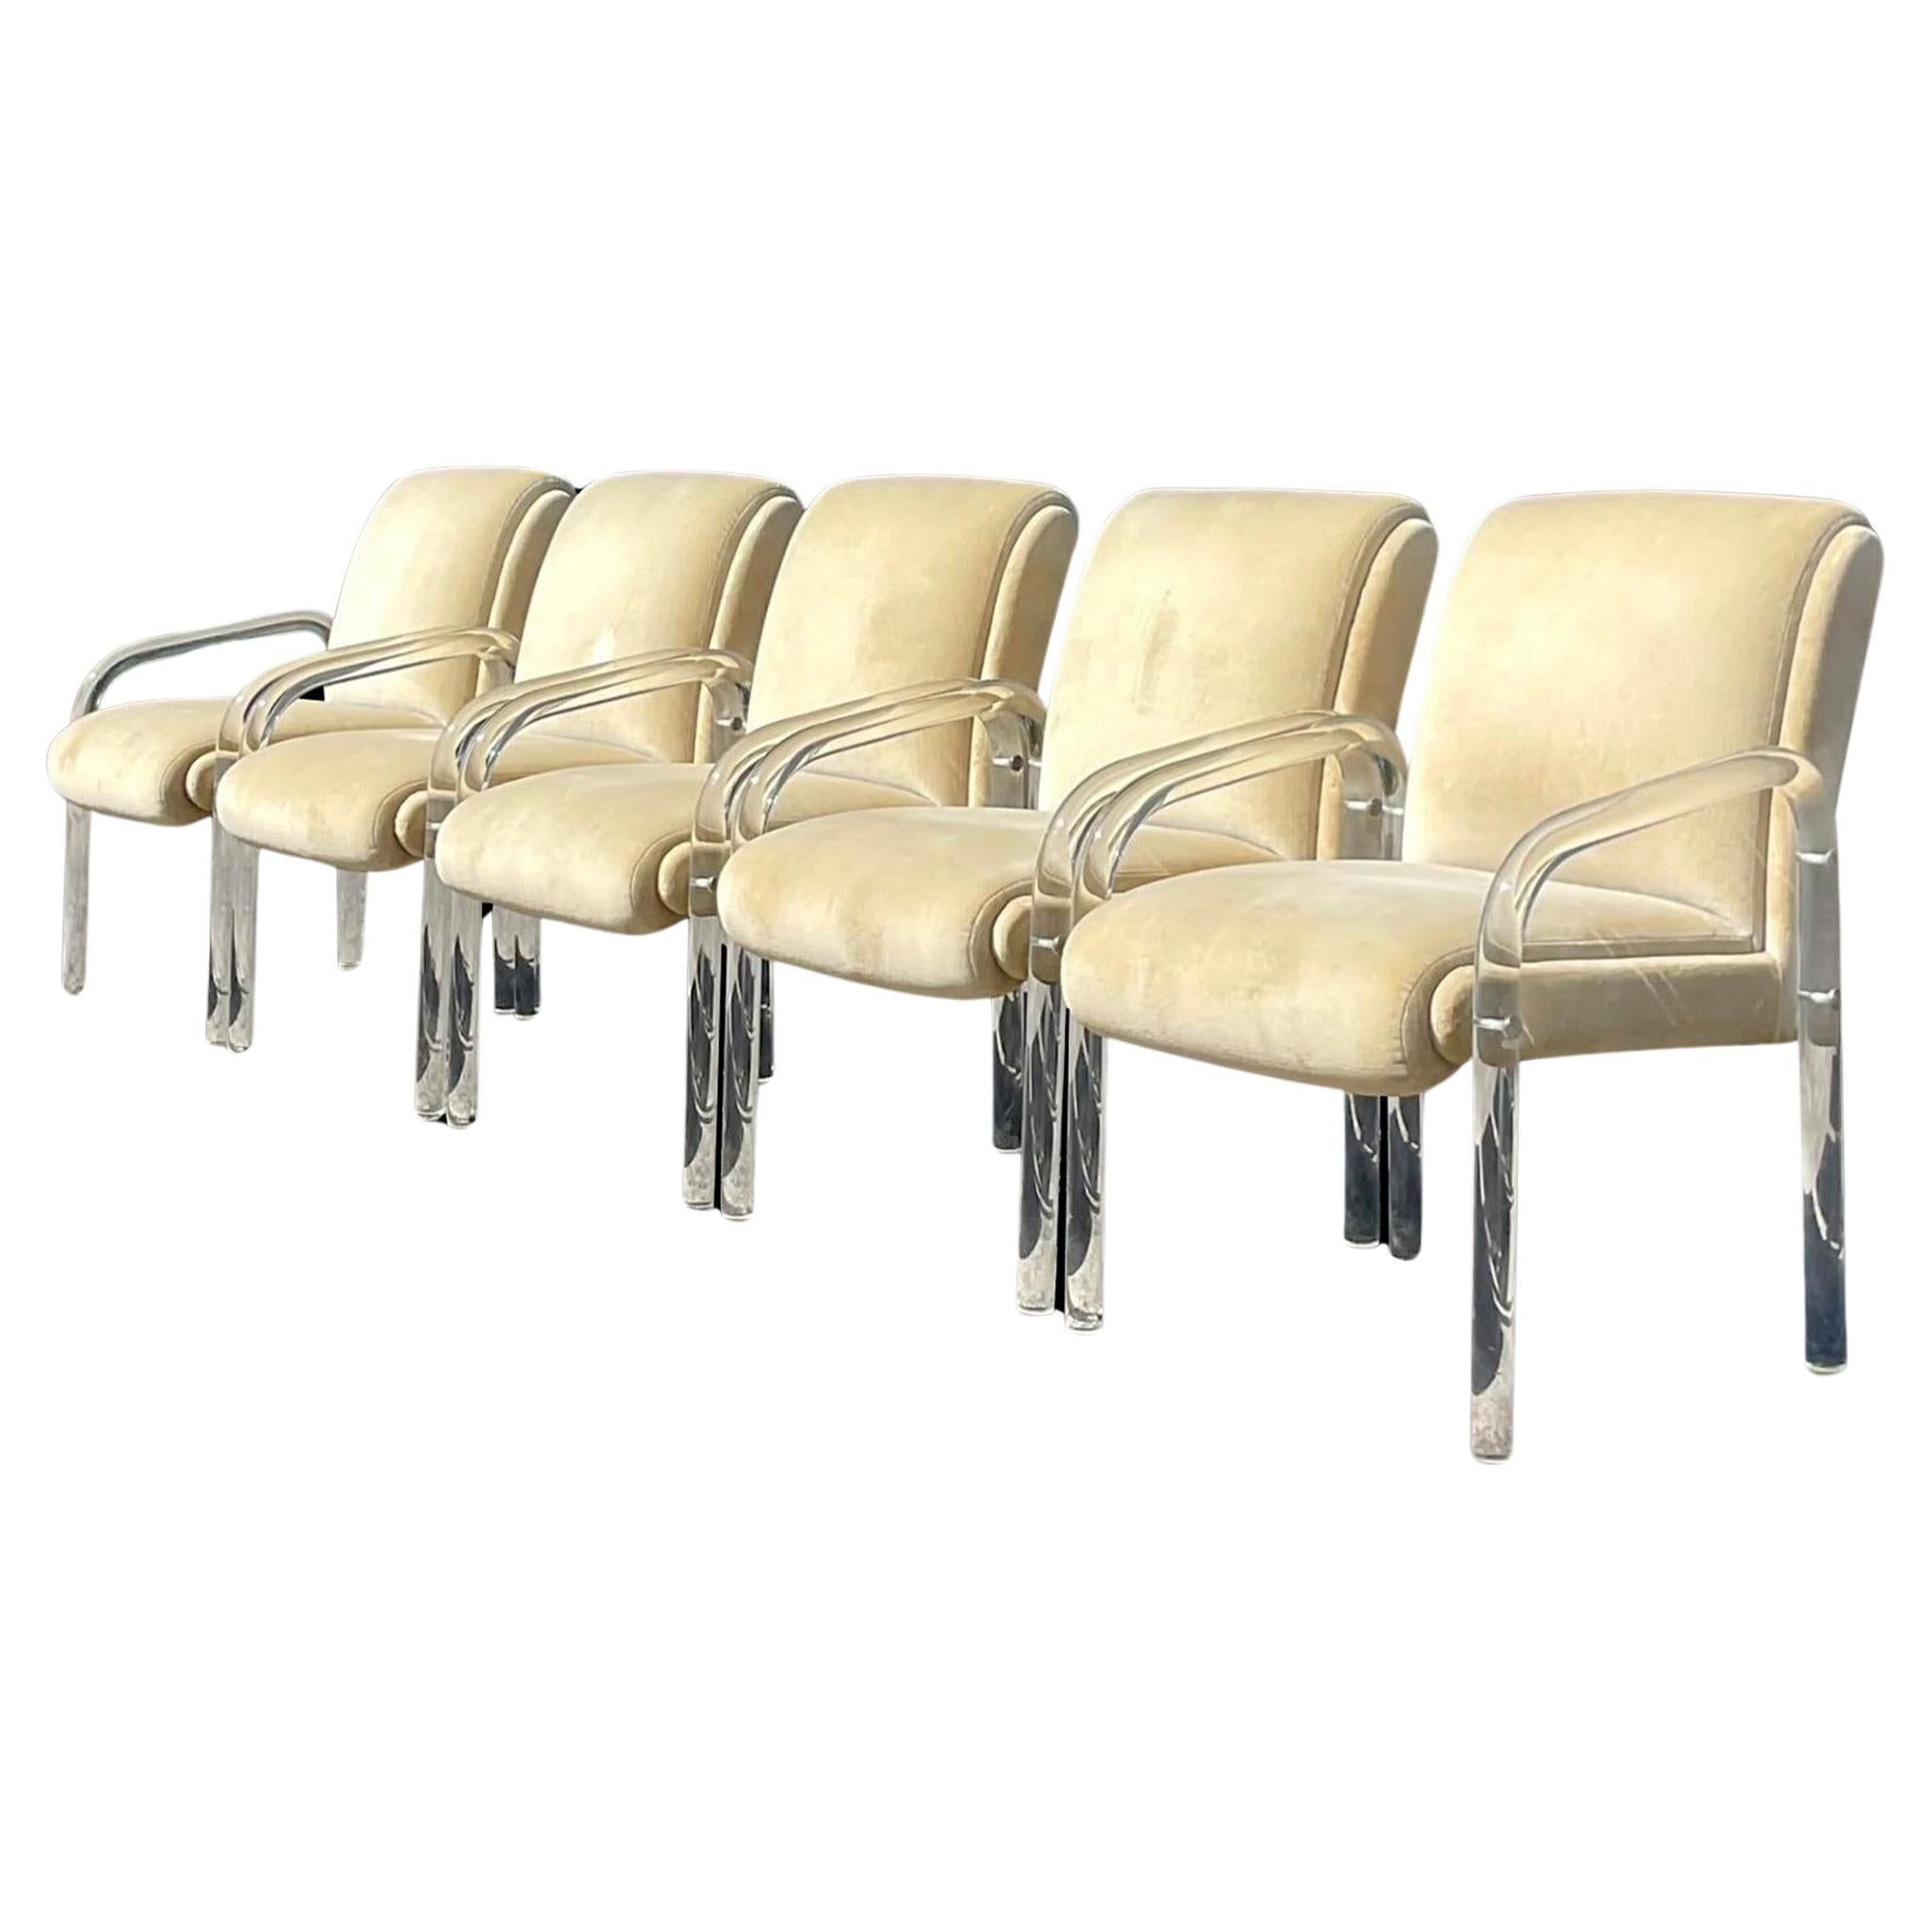 Vintage Boho Lucite Dining Chairs After Leon Russel for Pace- Set of 6